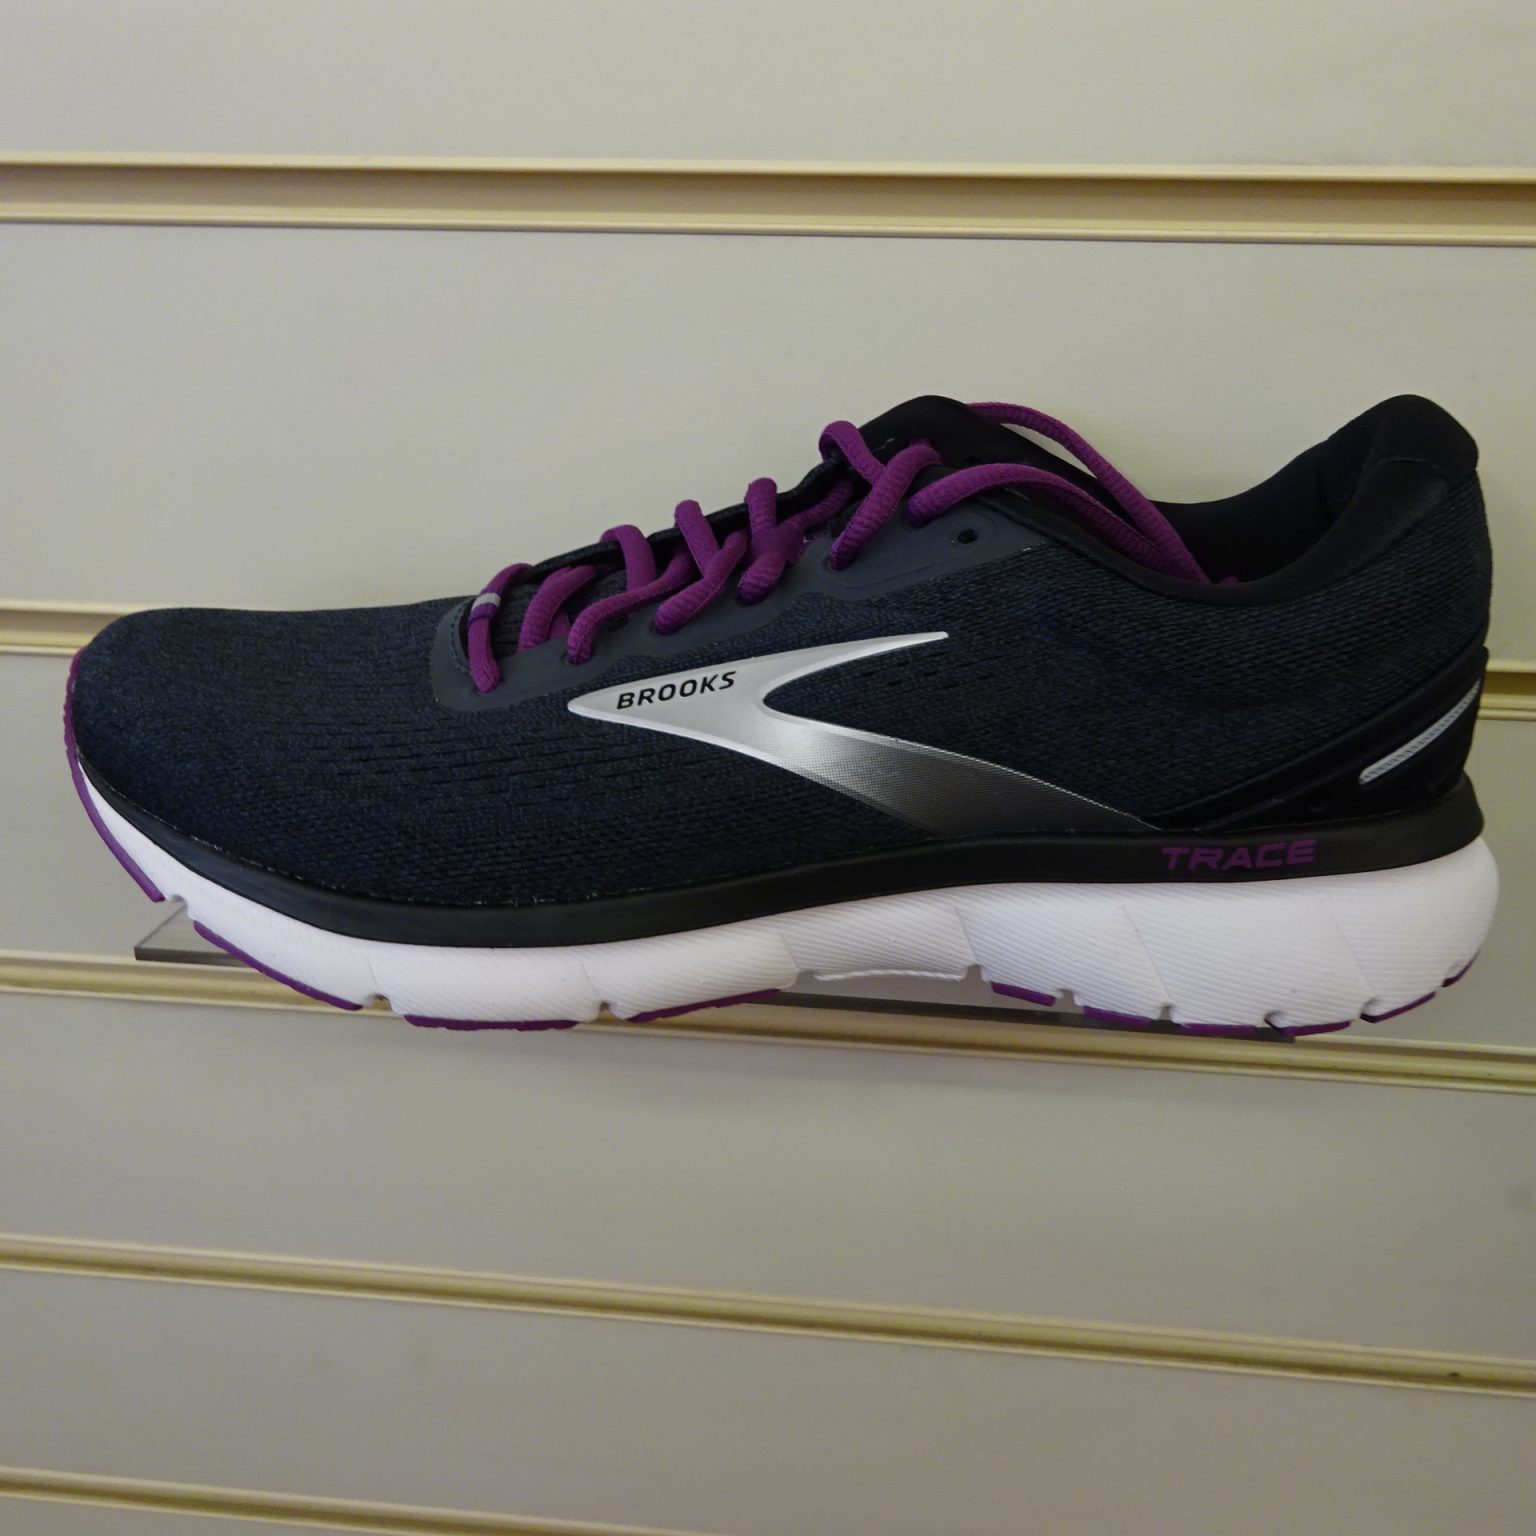 Brooks Trace Ladies - Simply Running: 01482 222169 - Mobile: 07849 118254